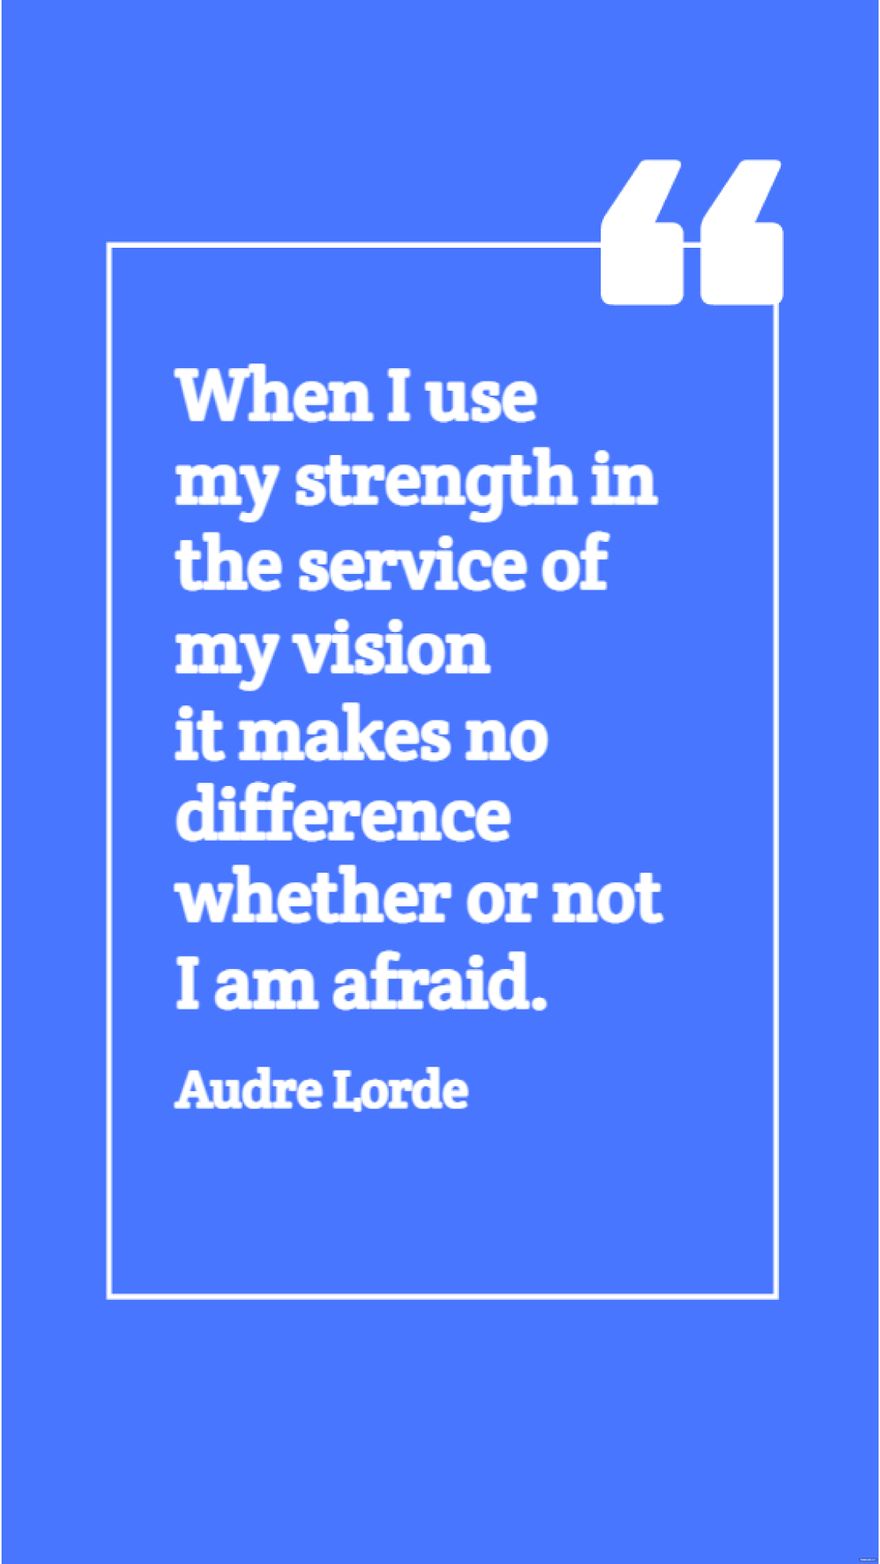 Audre Lorde - When I use my strength in the service of my vision it makes no difference whether or not I am afraid. in JPG